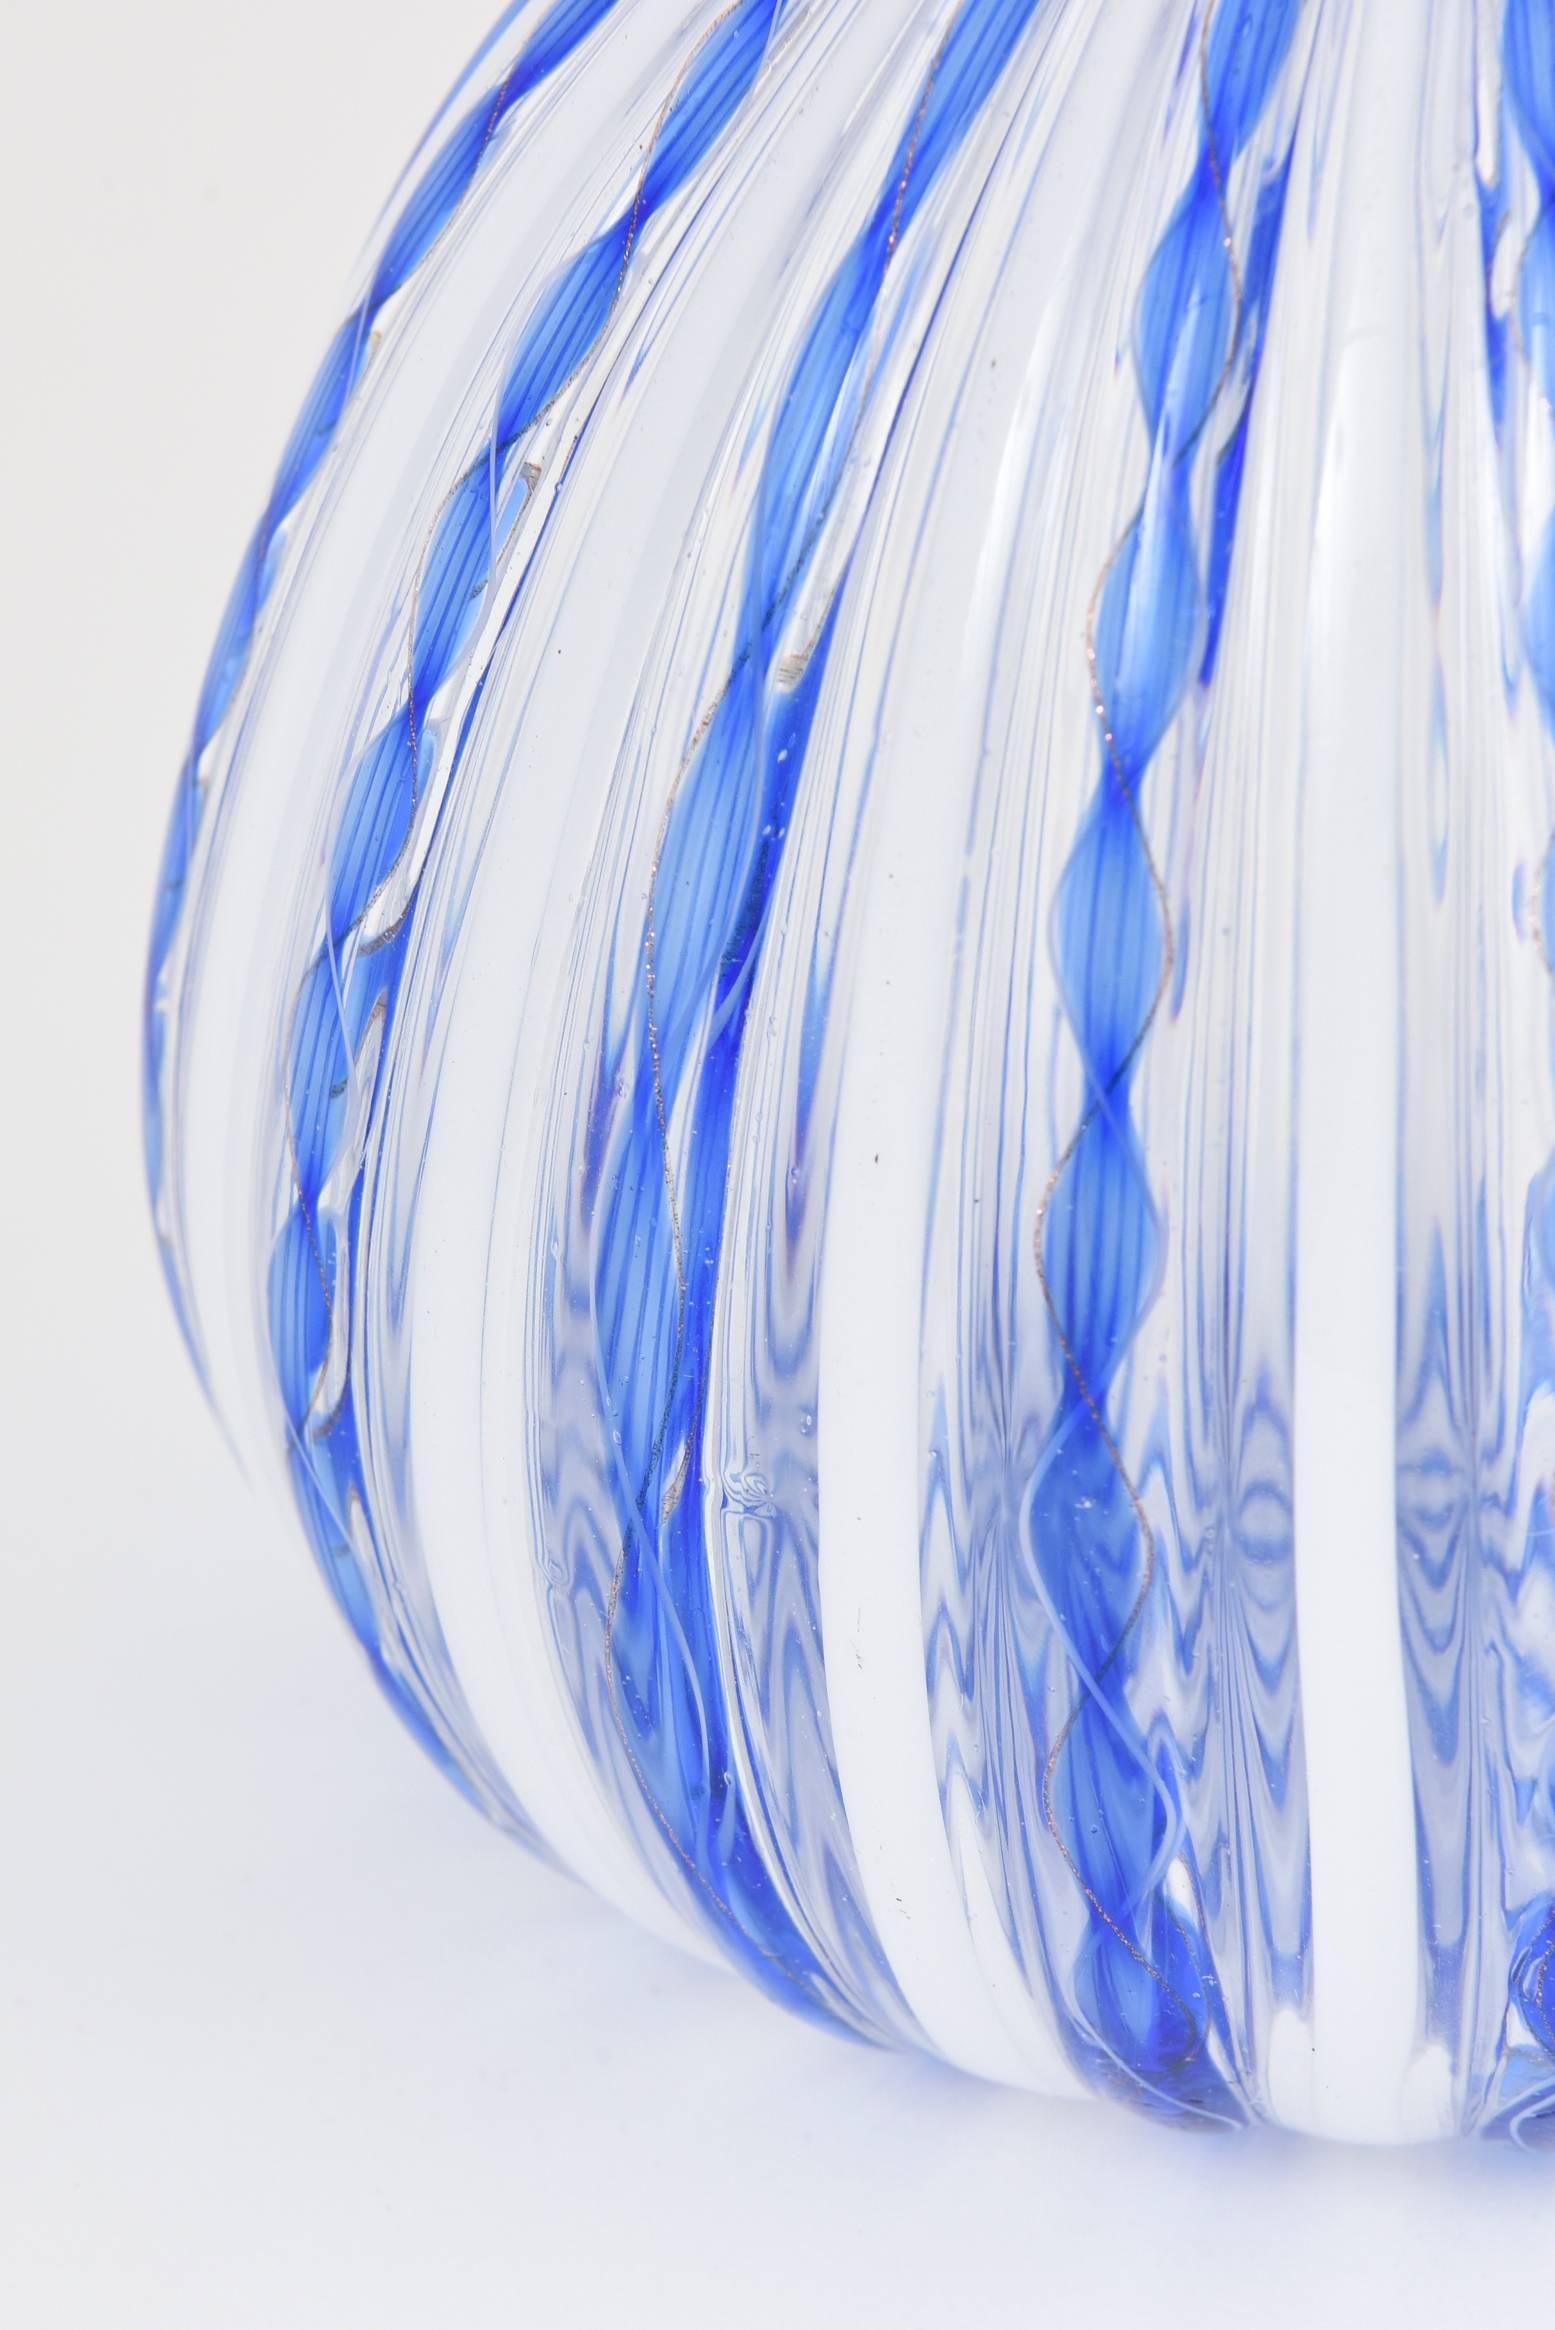 blue and white striped vase